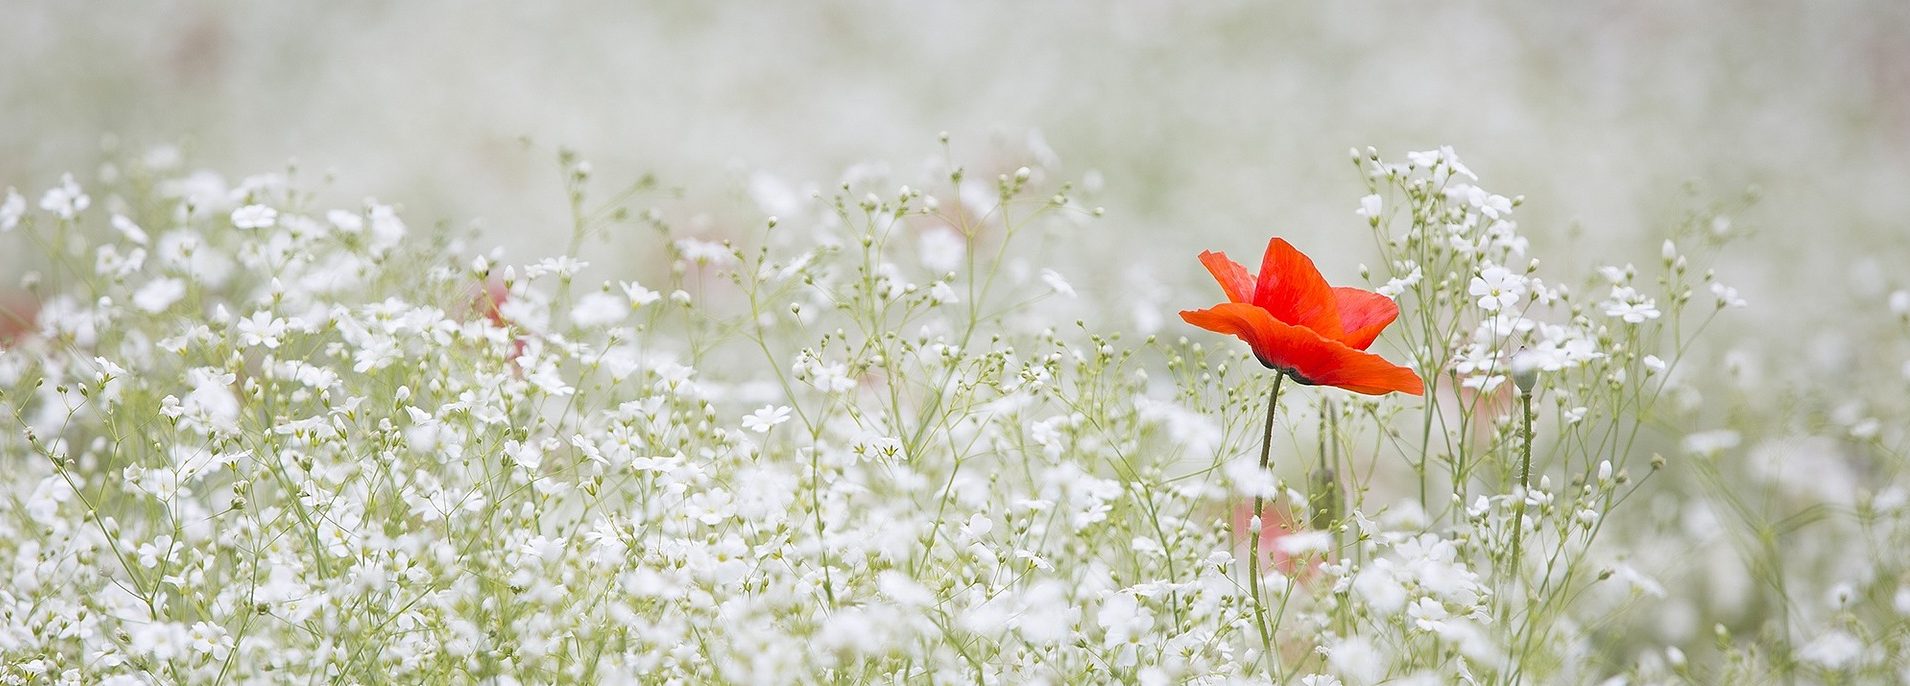 image of 1 red flower among background of white flowers becoming a naturalist